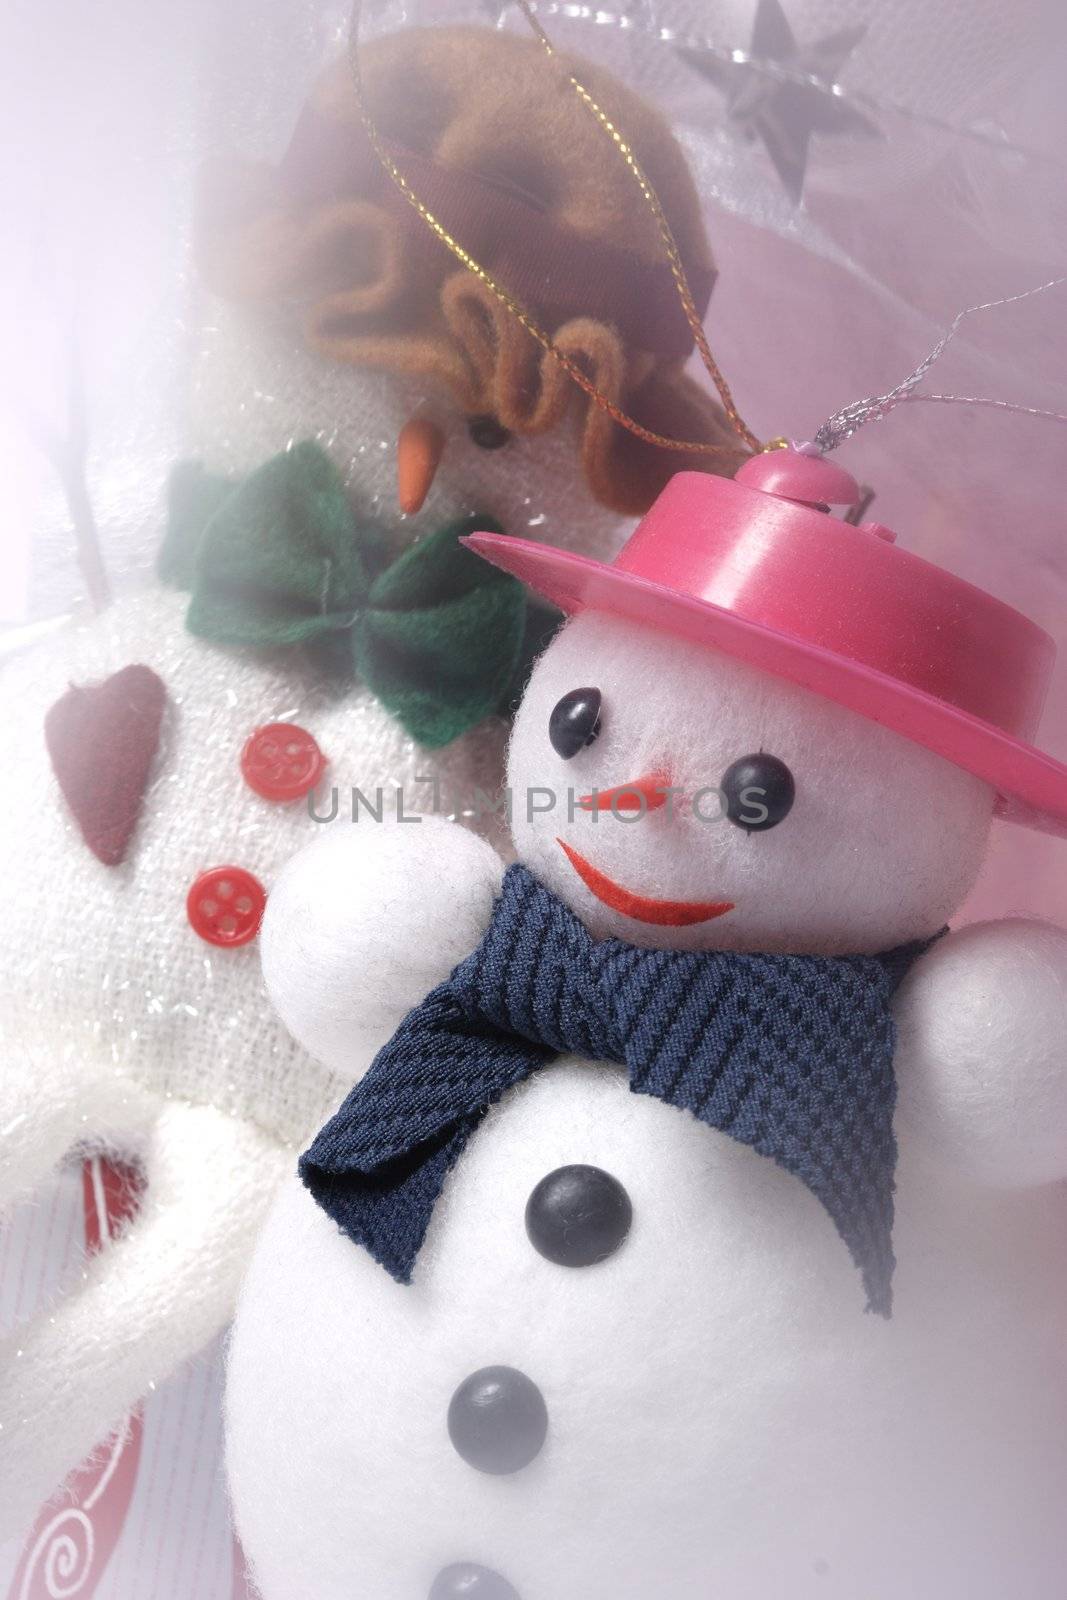 xmas still life with snow man. Captured with soft filter